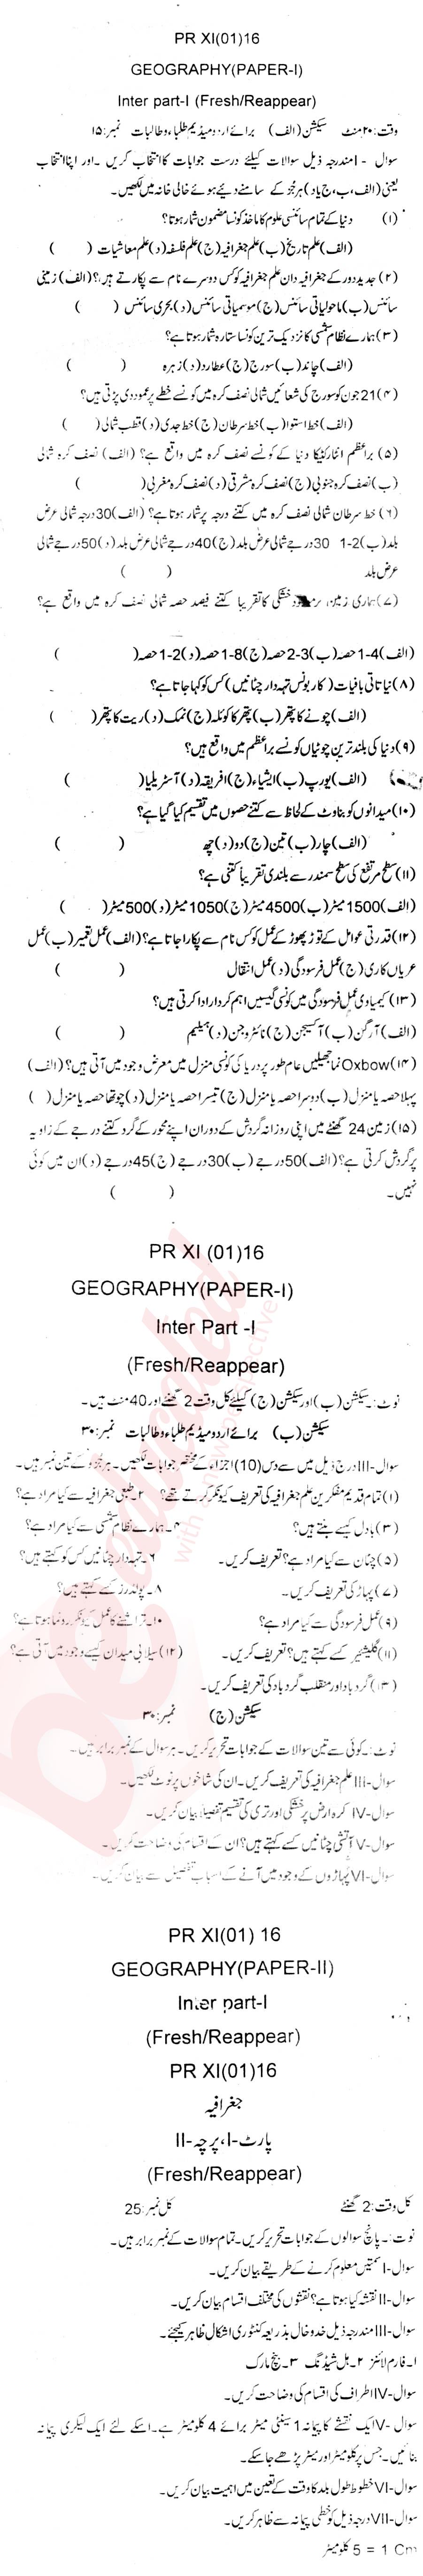 Commercial Geography FA Part 1 Past Paper Group 1 BISE Peshawar 2016